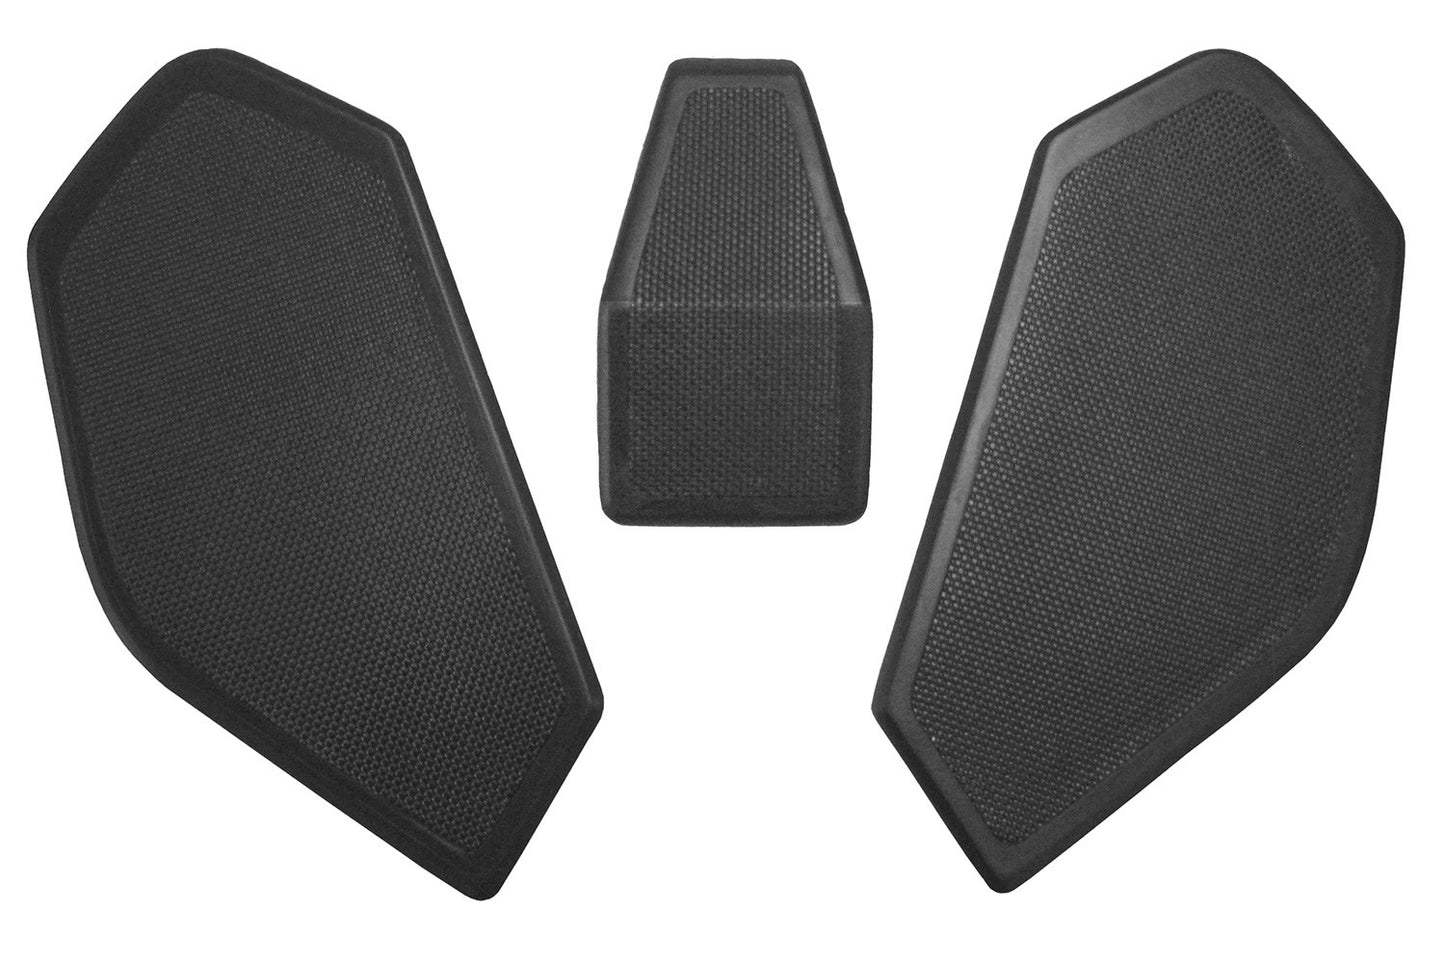 Wunderlich tank protection pad Touring - 3 pieces - black